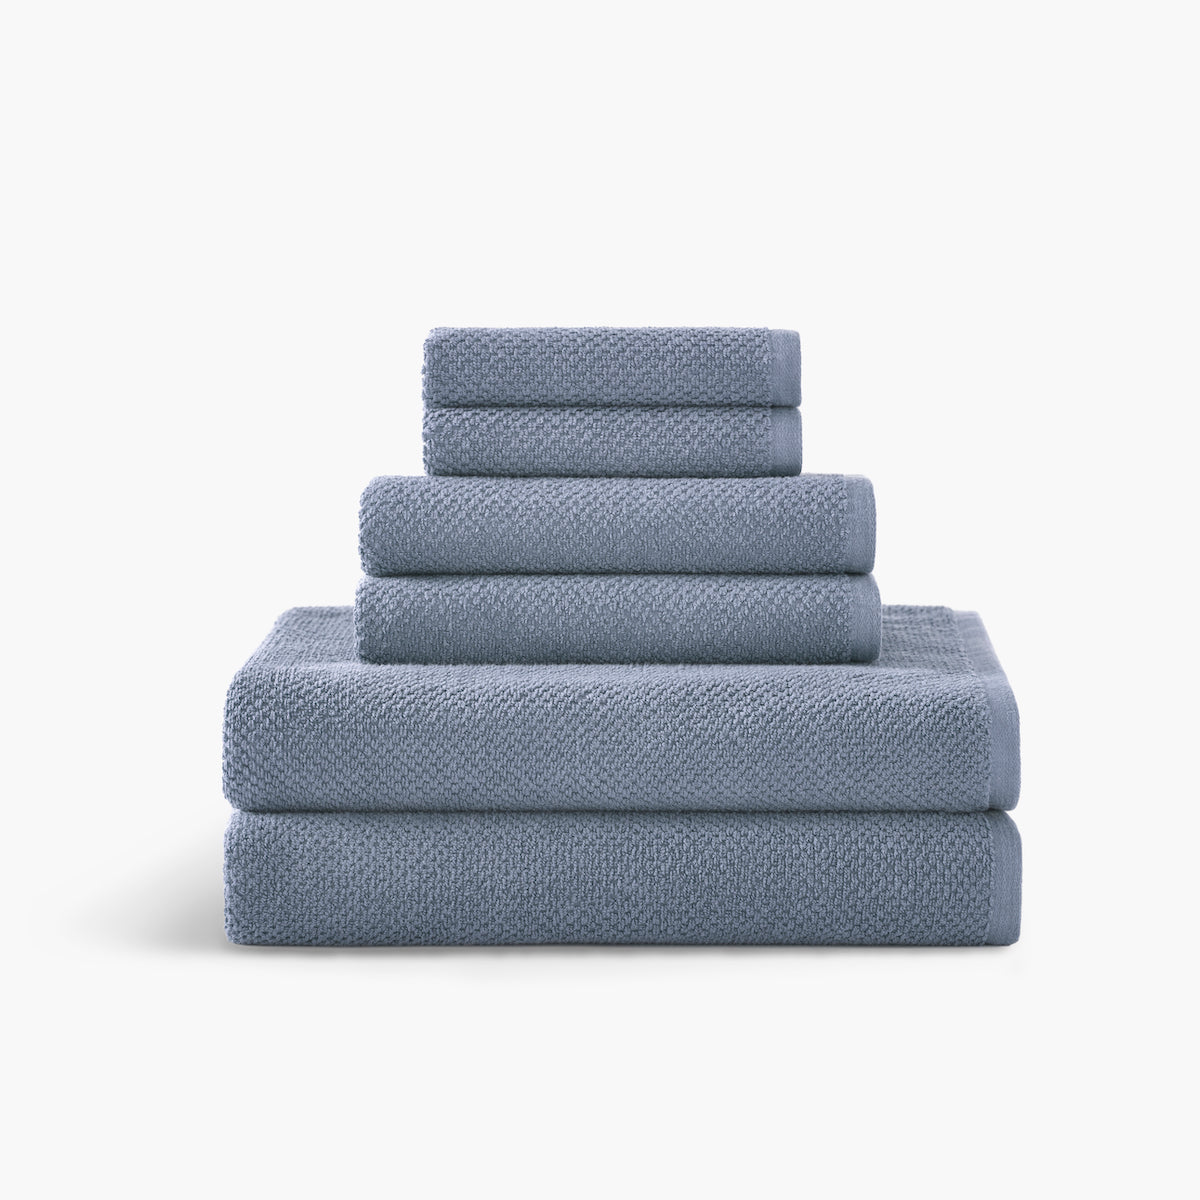 These Best-Selling Bath Towels Are on Sale for Only $3!